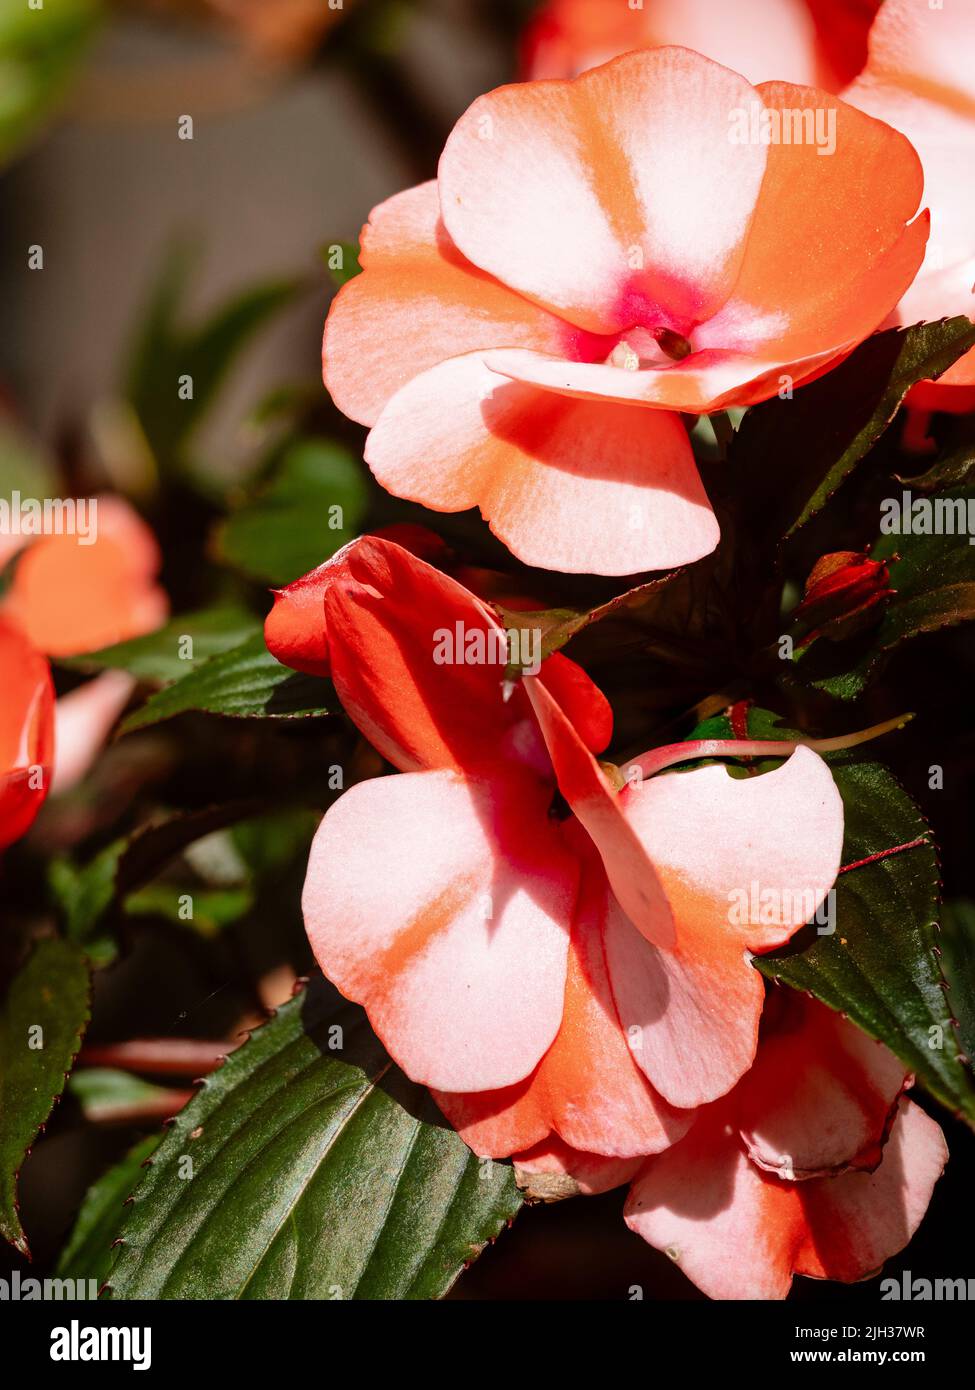 Pale pink and red flowers of the tender New Guinea Impatiens, Impatiens hawkerii 'Paradise Strawberry Bicolor' grown for summer outside display Stock Photo